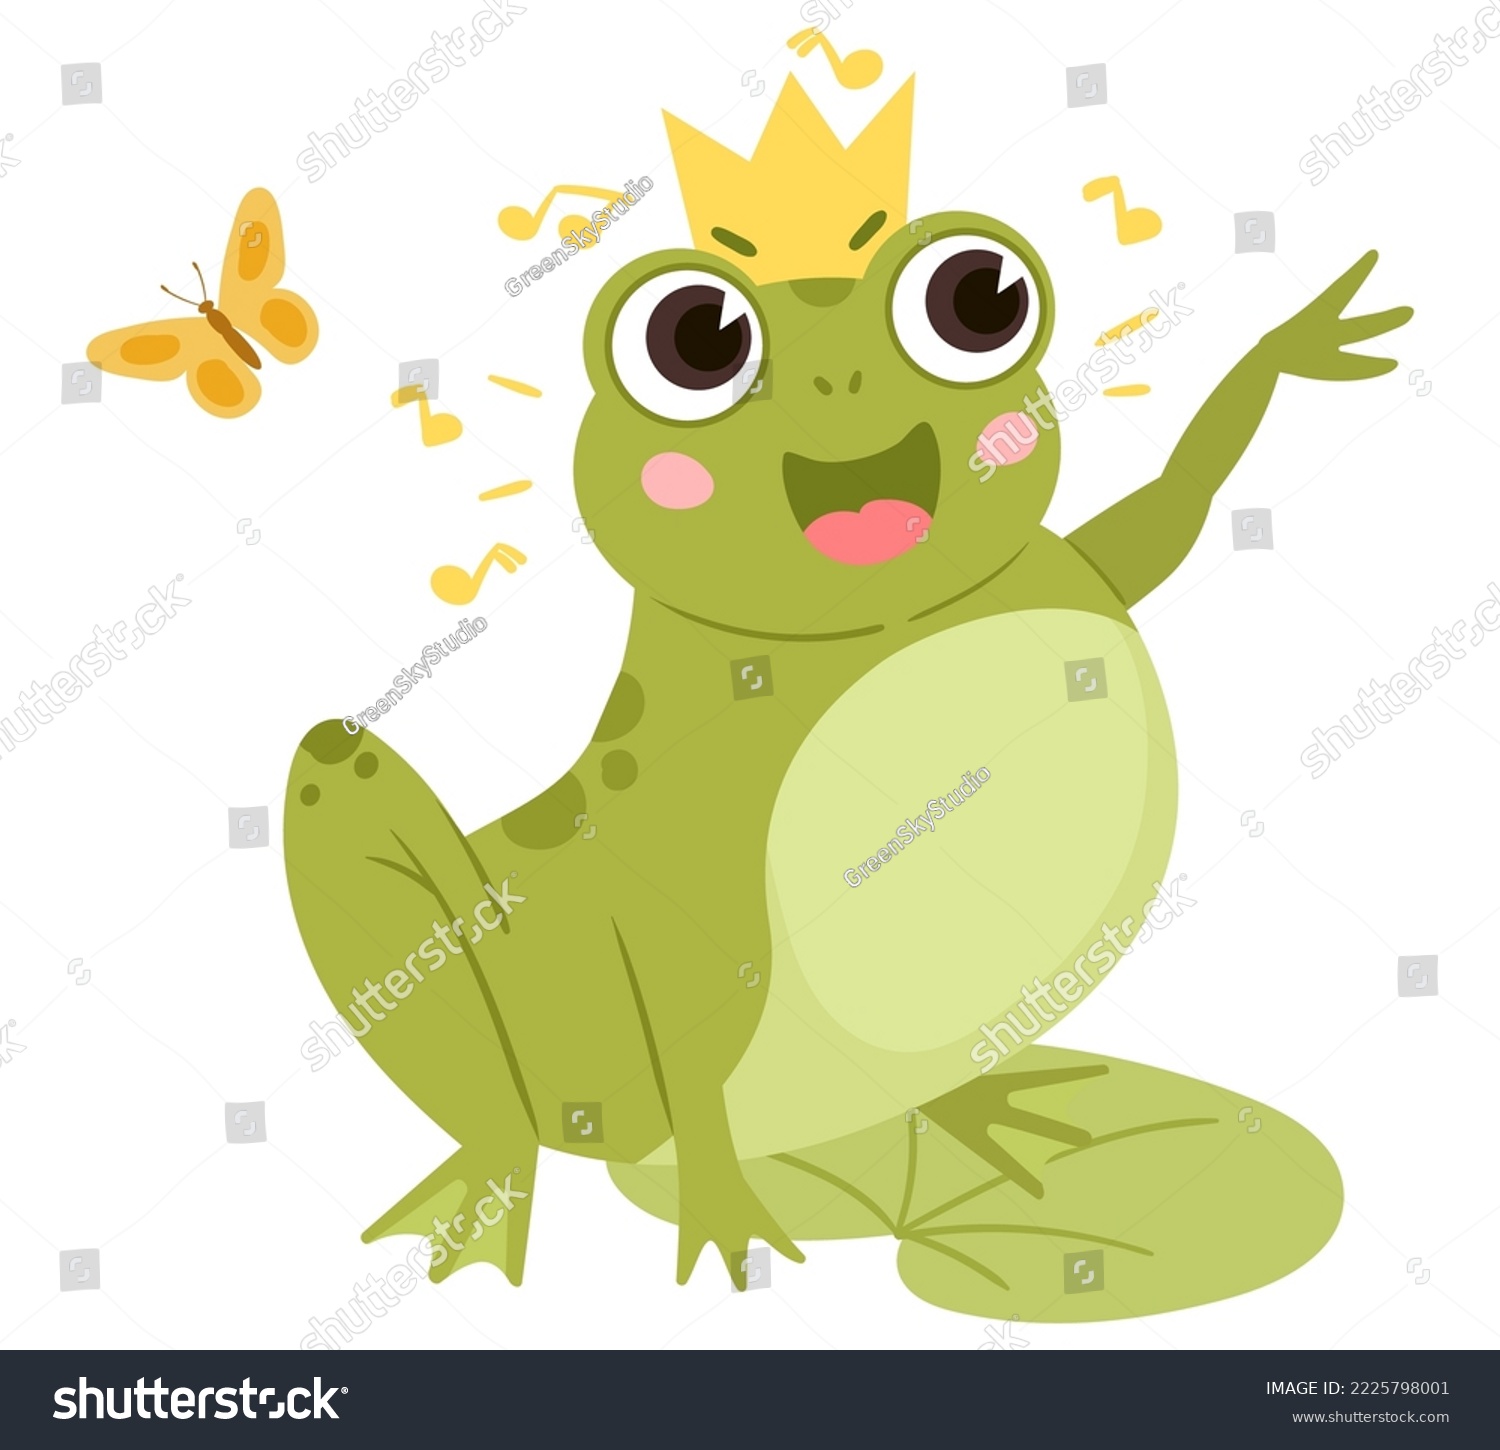 SVG of Cartoon green frog in crown sitting in pond. Cute amphibia in natural habitat, froggy animal in pond with water lilies isolated flat vector illustration on white background svg